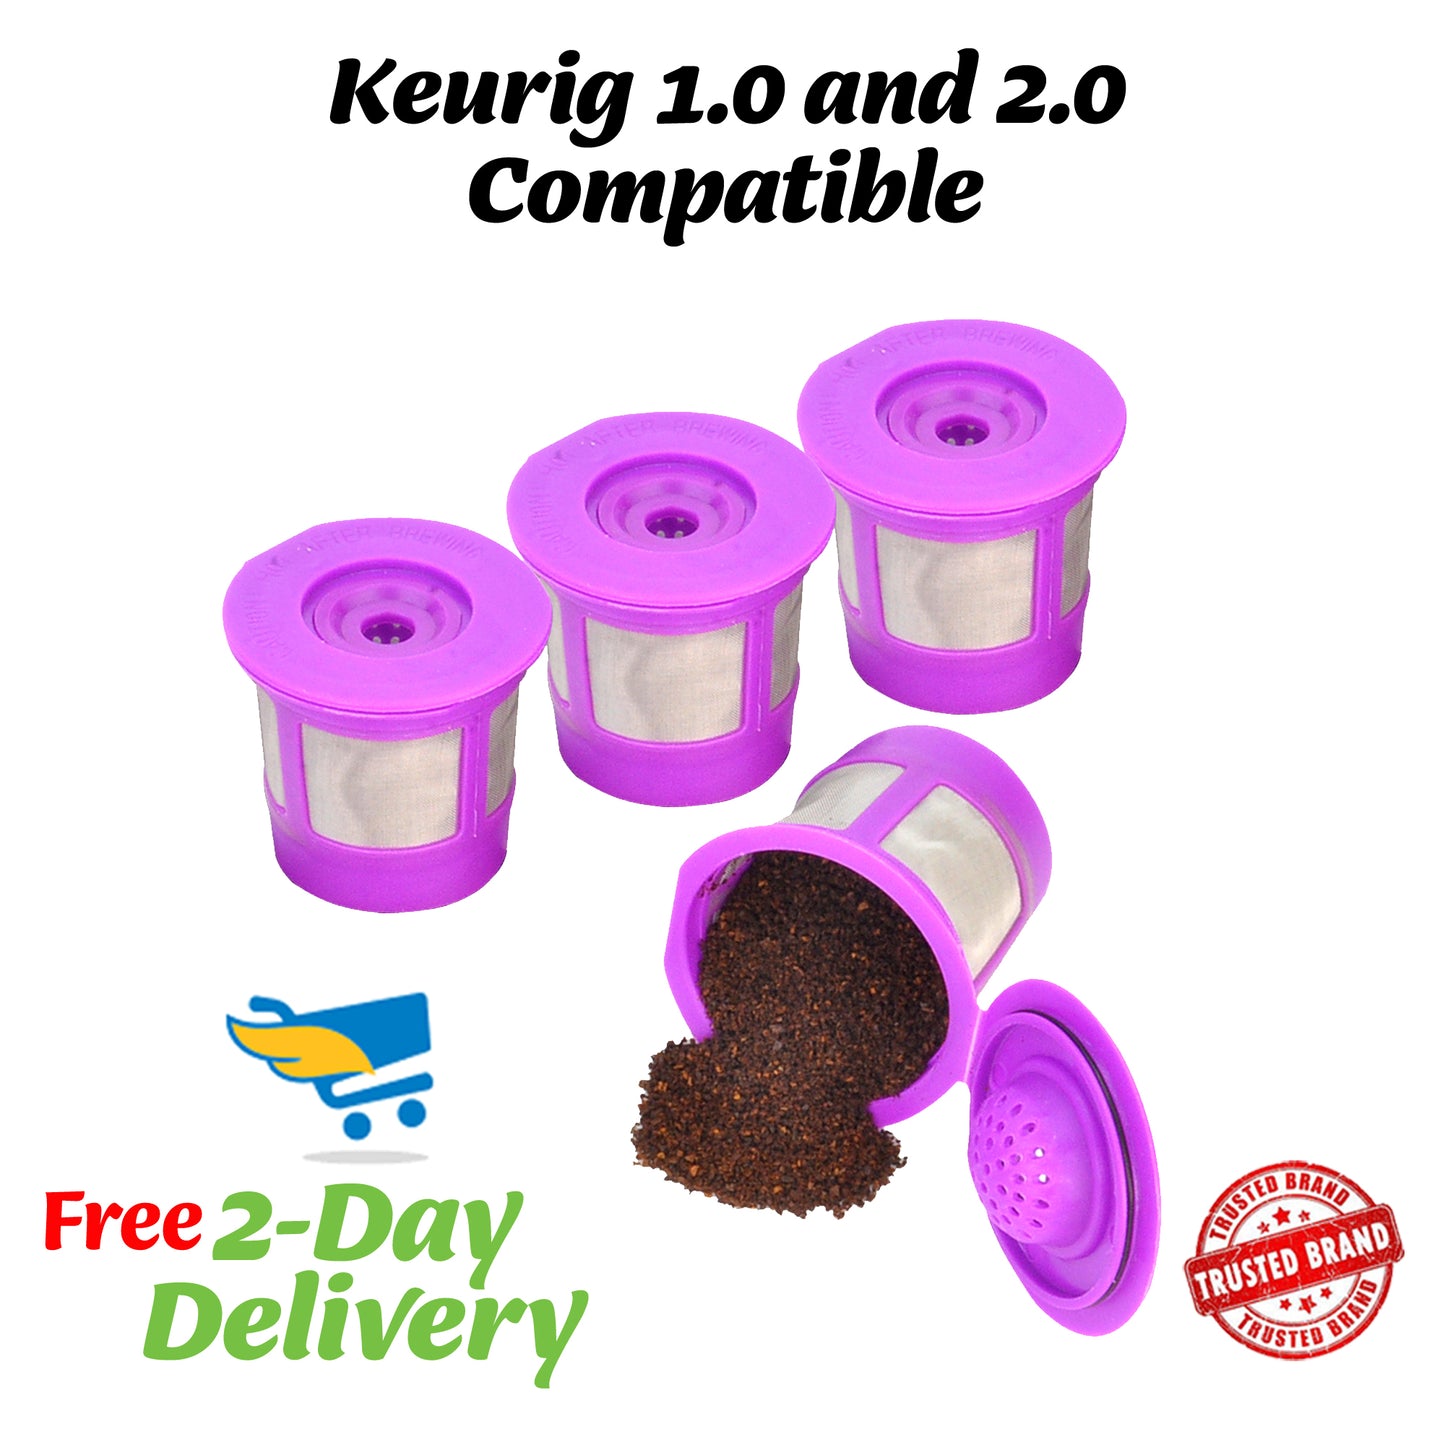 Reusable K-cups for Keurig 2.0 and 1.0 Machines 4packs